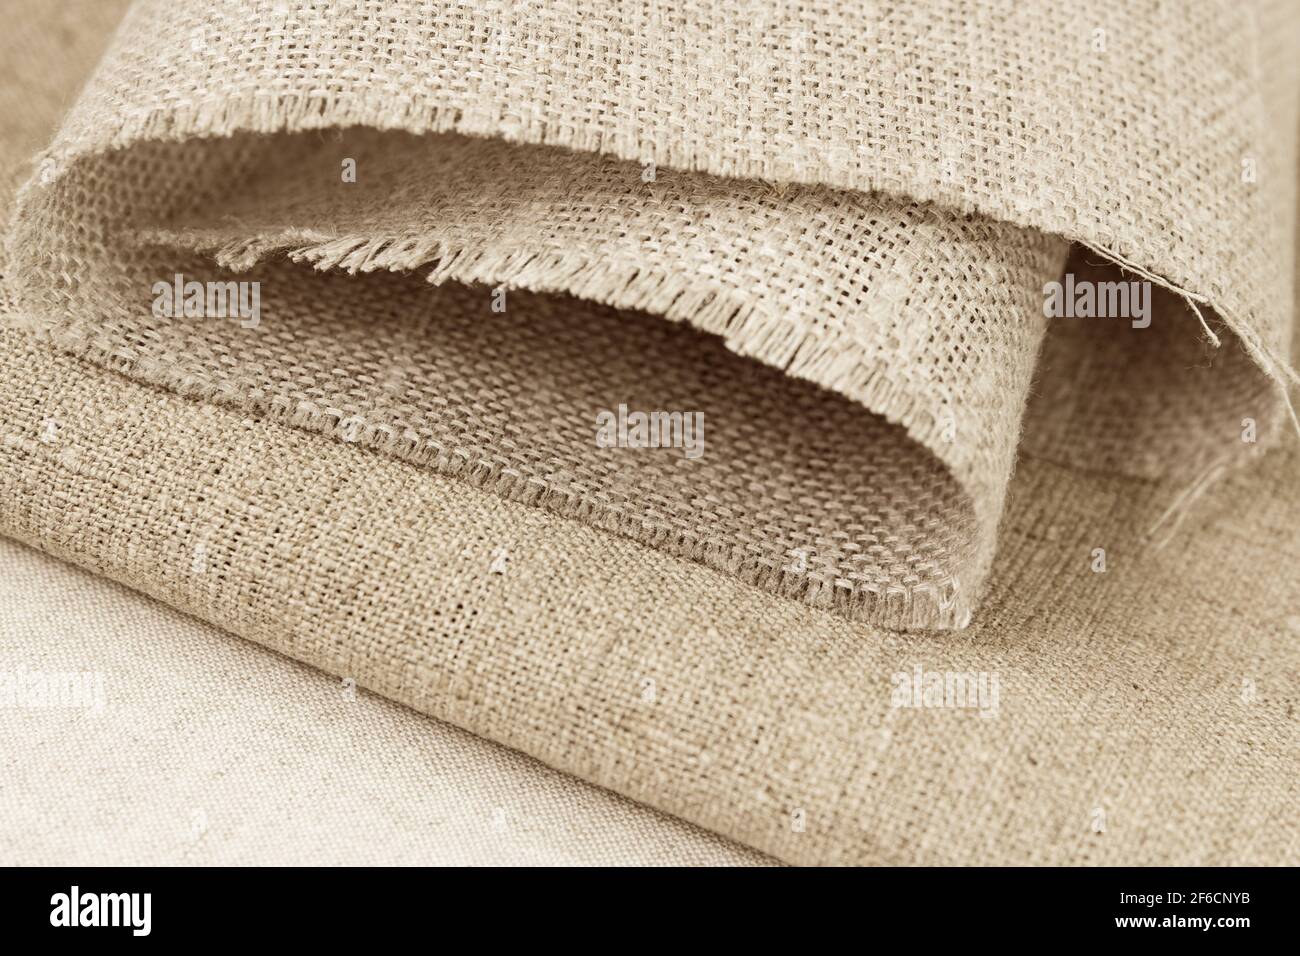 Various sample of unbleached fabric cotton and flax Stock Photo